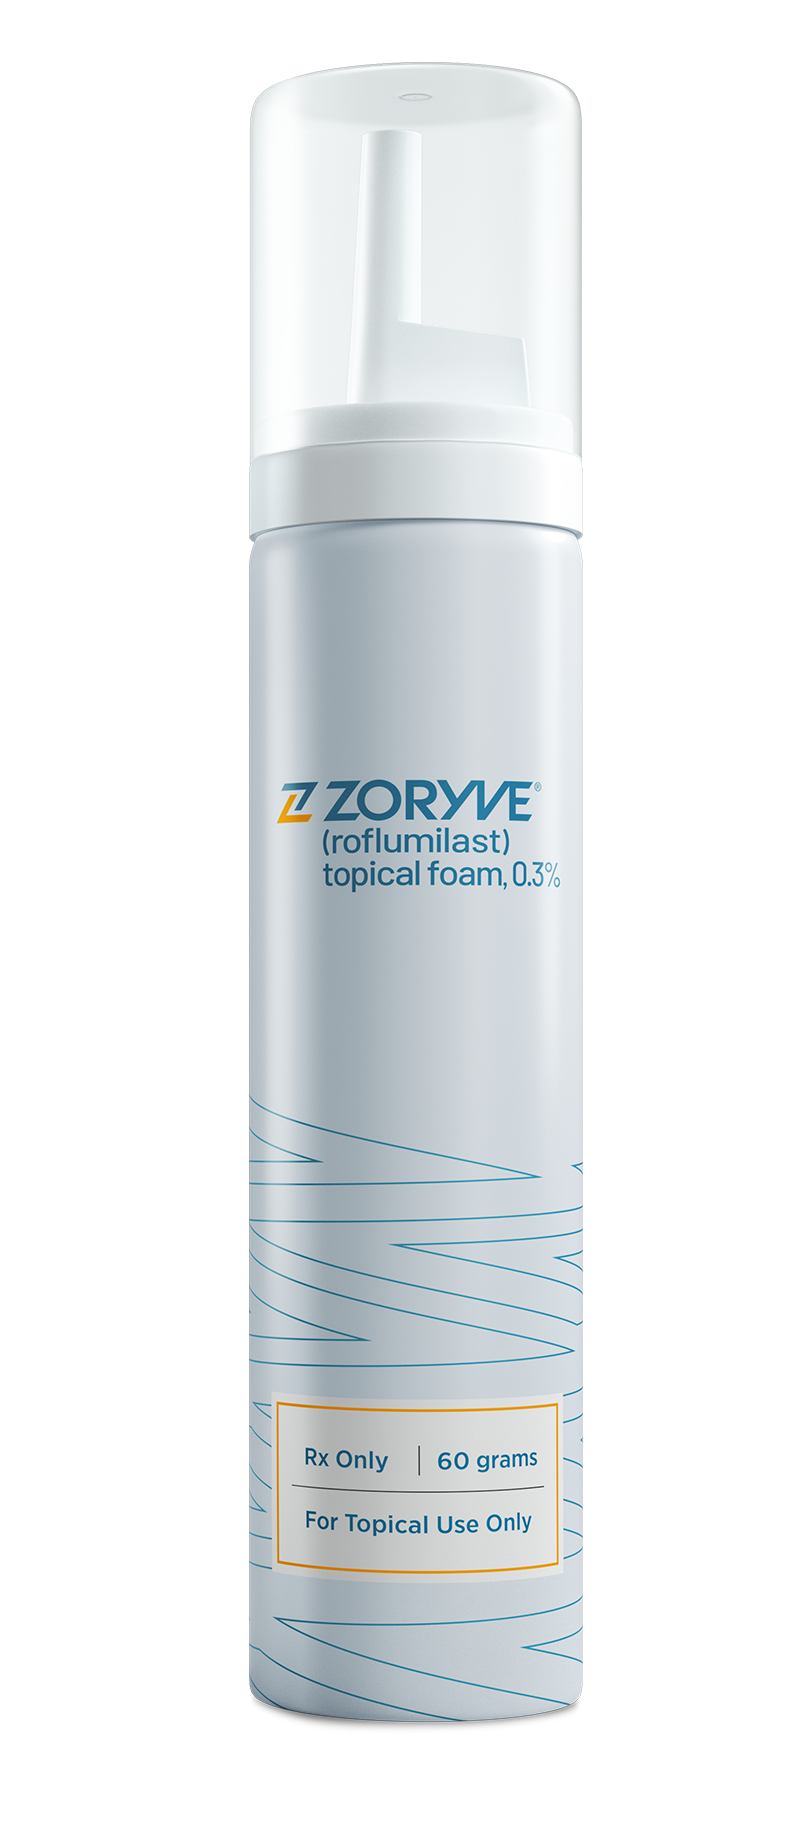 ZORYVE (roflumilast) topical foam, 0.3% canister 